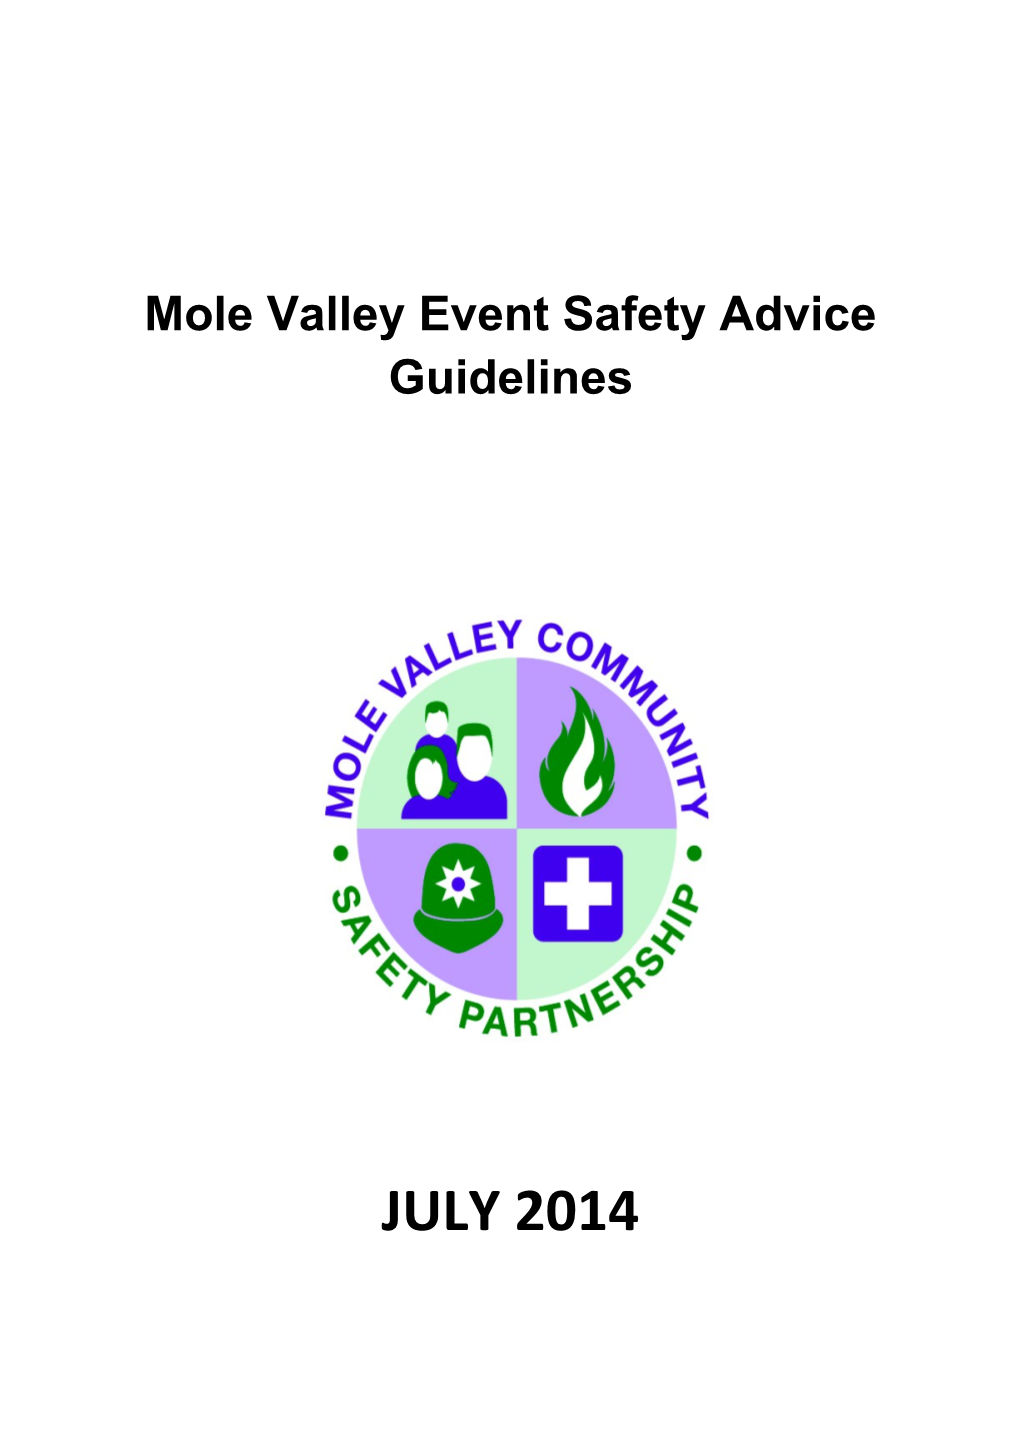 Working with the Surrey Event Safety Group